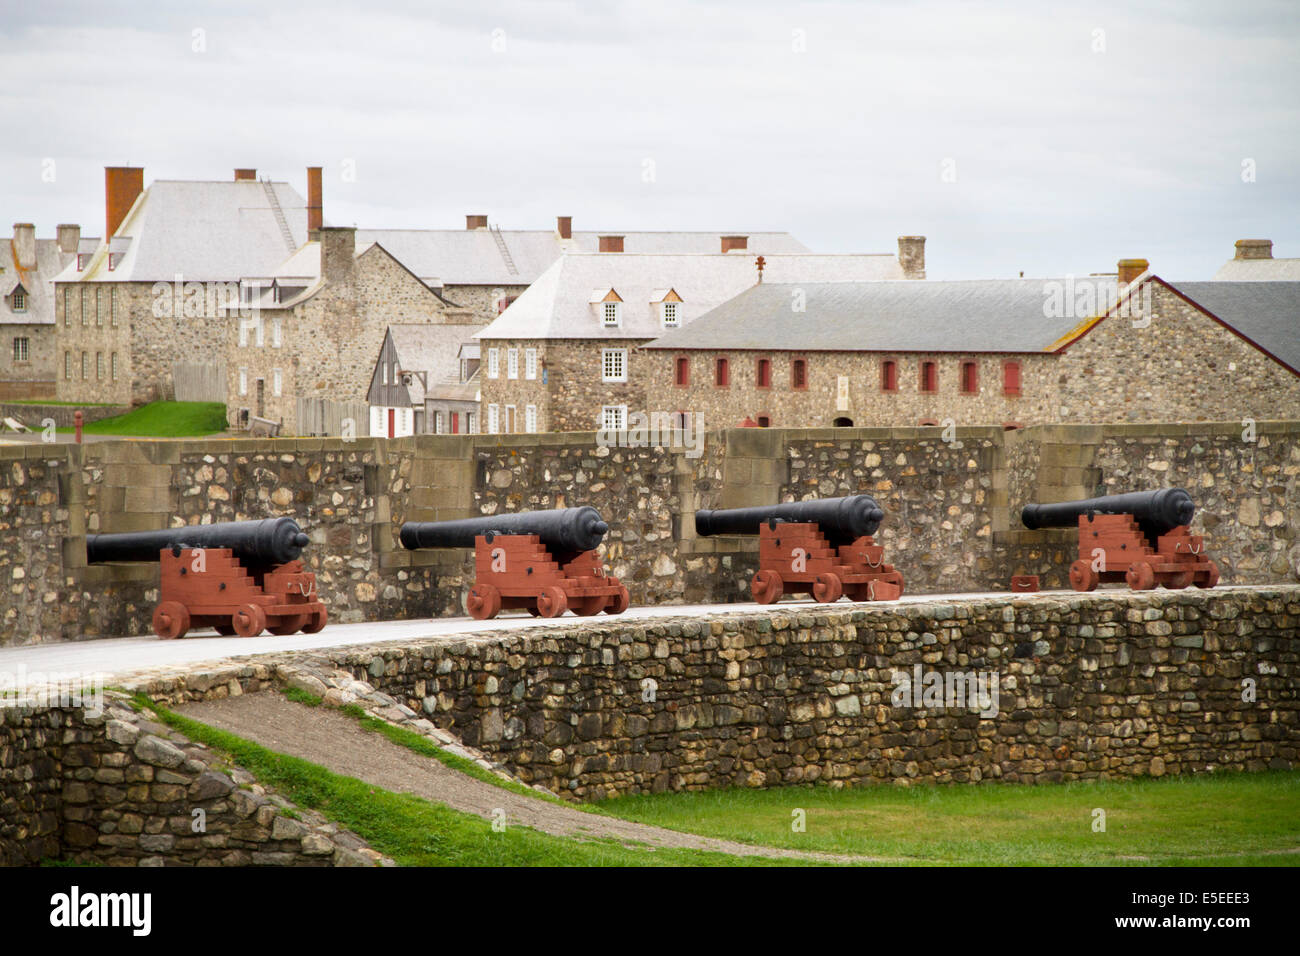 Cannons line the ramparts of the Fortress of Louisbourg, one of the main outposts of France in Eastern Canada in the 1700's, now Stock Photo